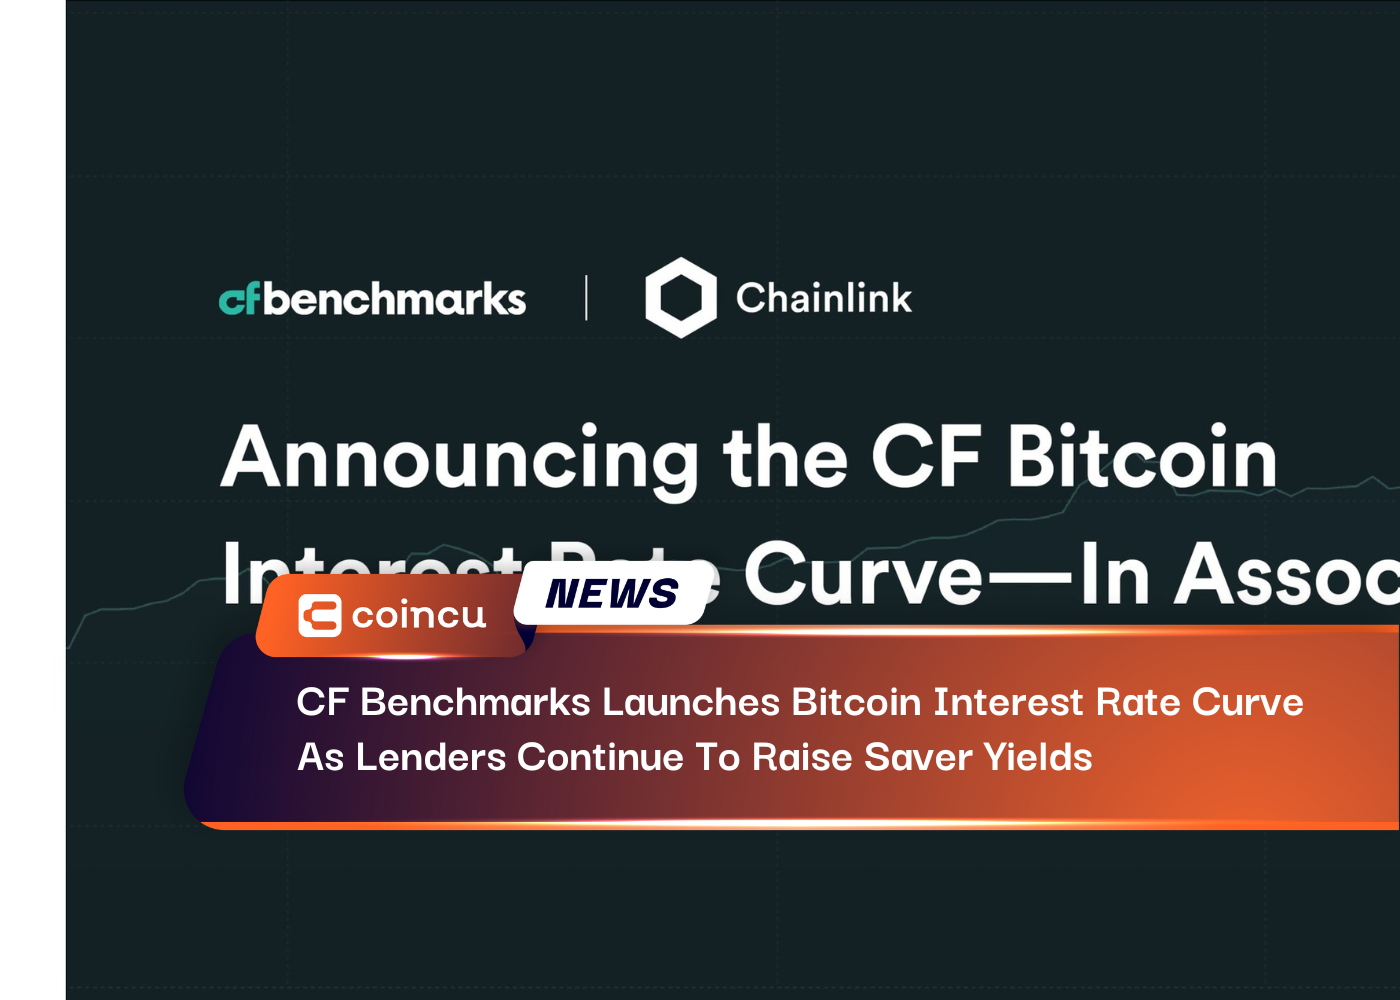 CF Benchmarks Launches Bitcoin Interest Rate Curve